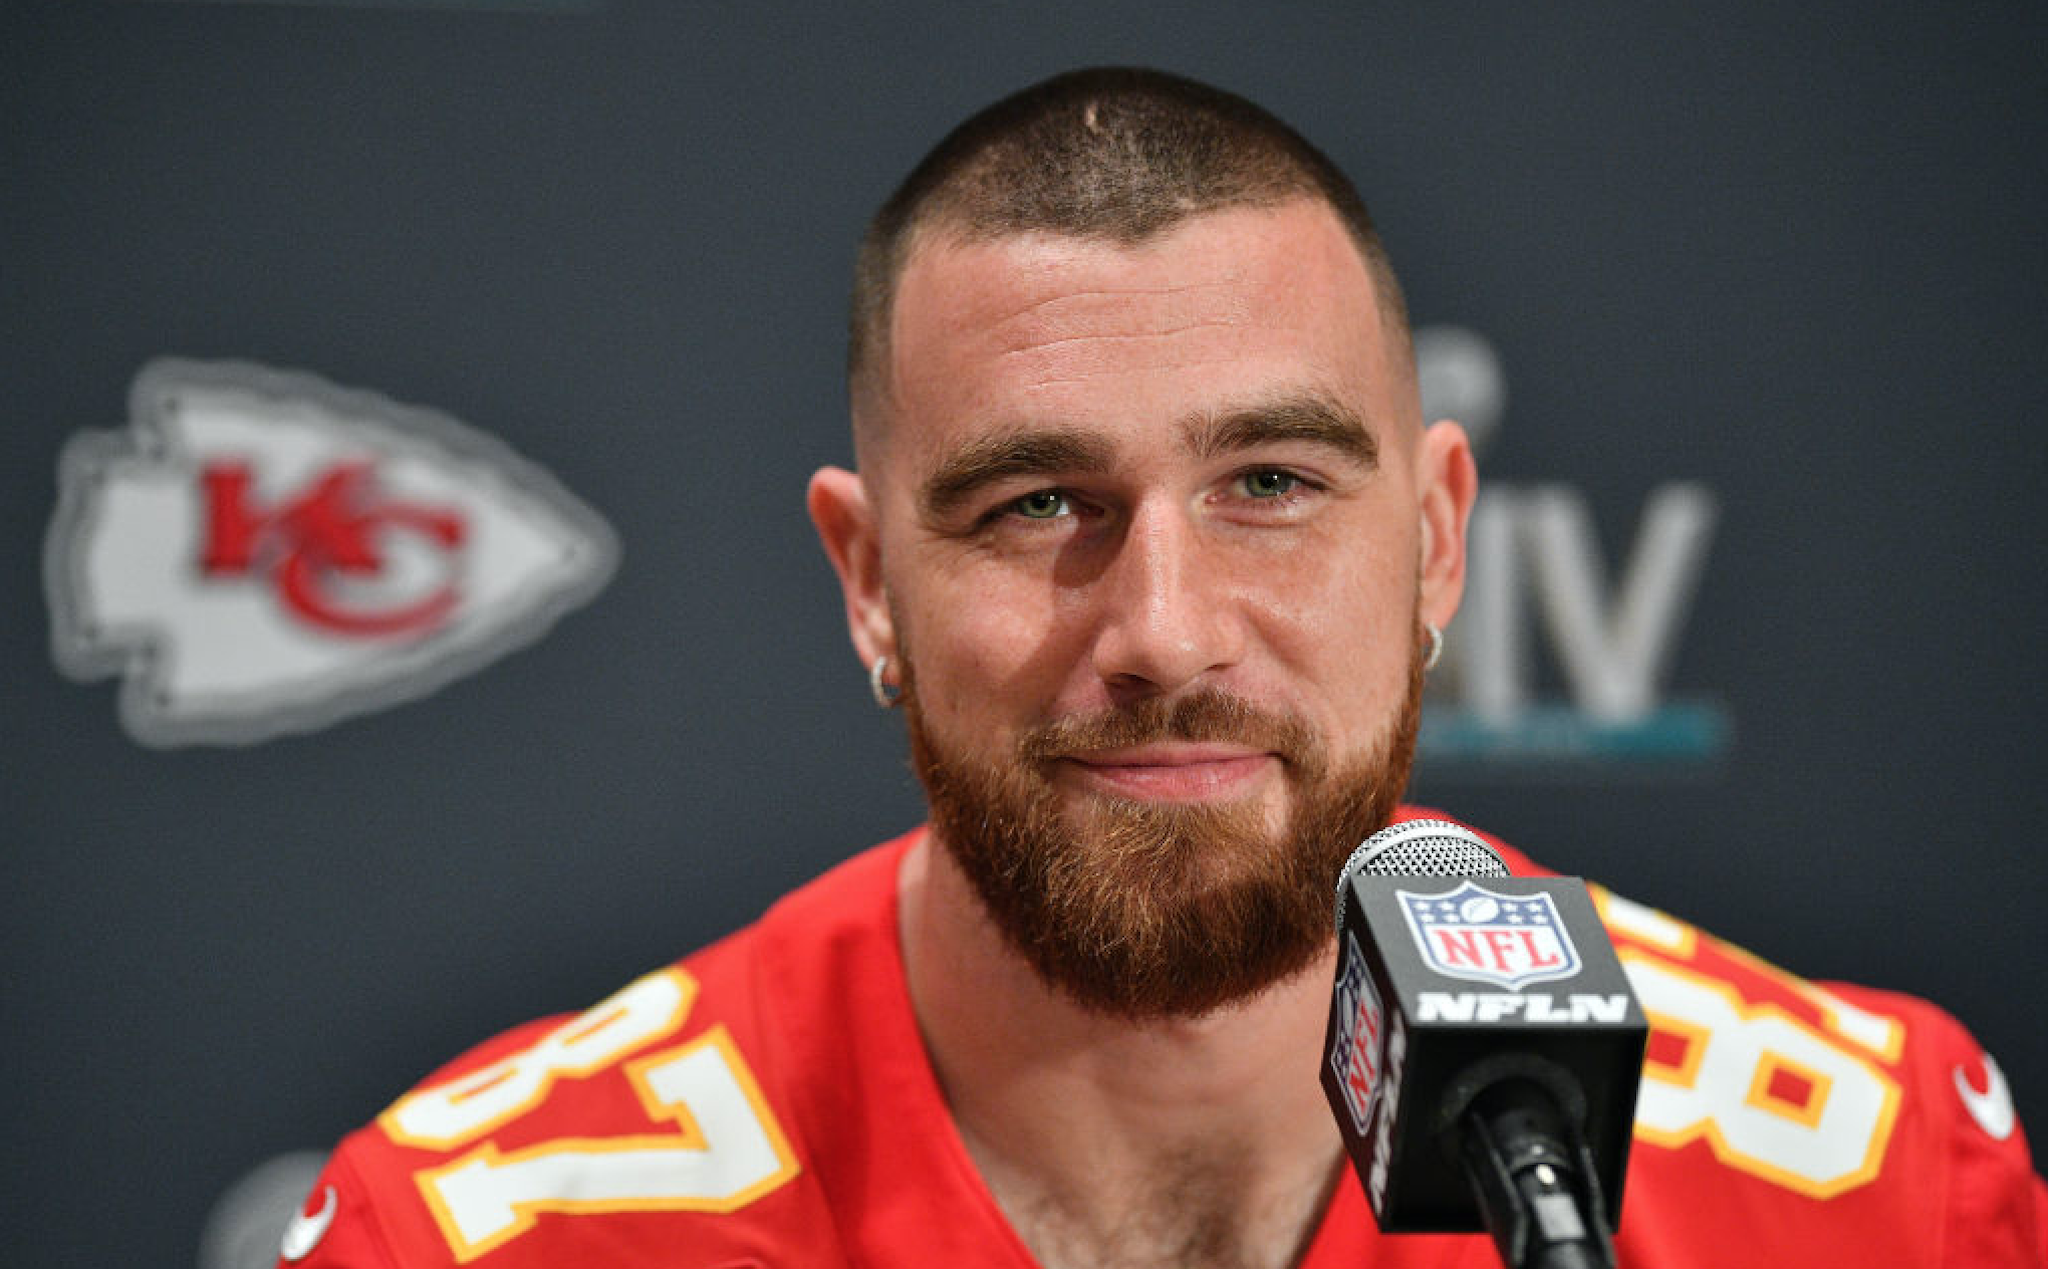 Travis Kelce #87 of the Kansas City Chiefs speaks to the media during the Kansas City Chiefs media availability prior to Super Bowl LIV at the JW Marriott Turnberry on January 30, 2020 in Aventura, Florida.